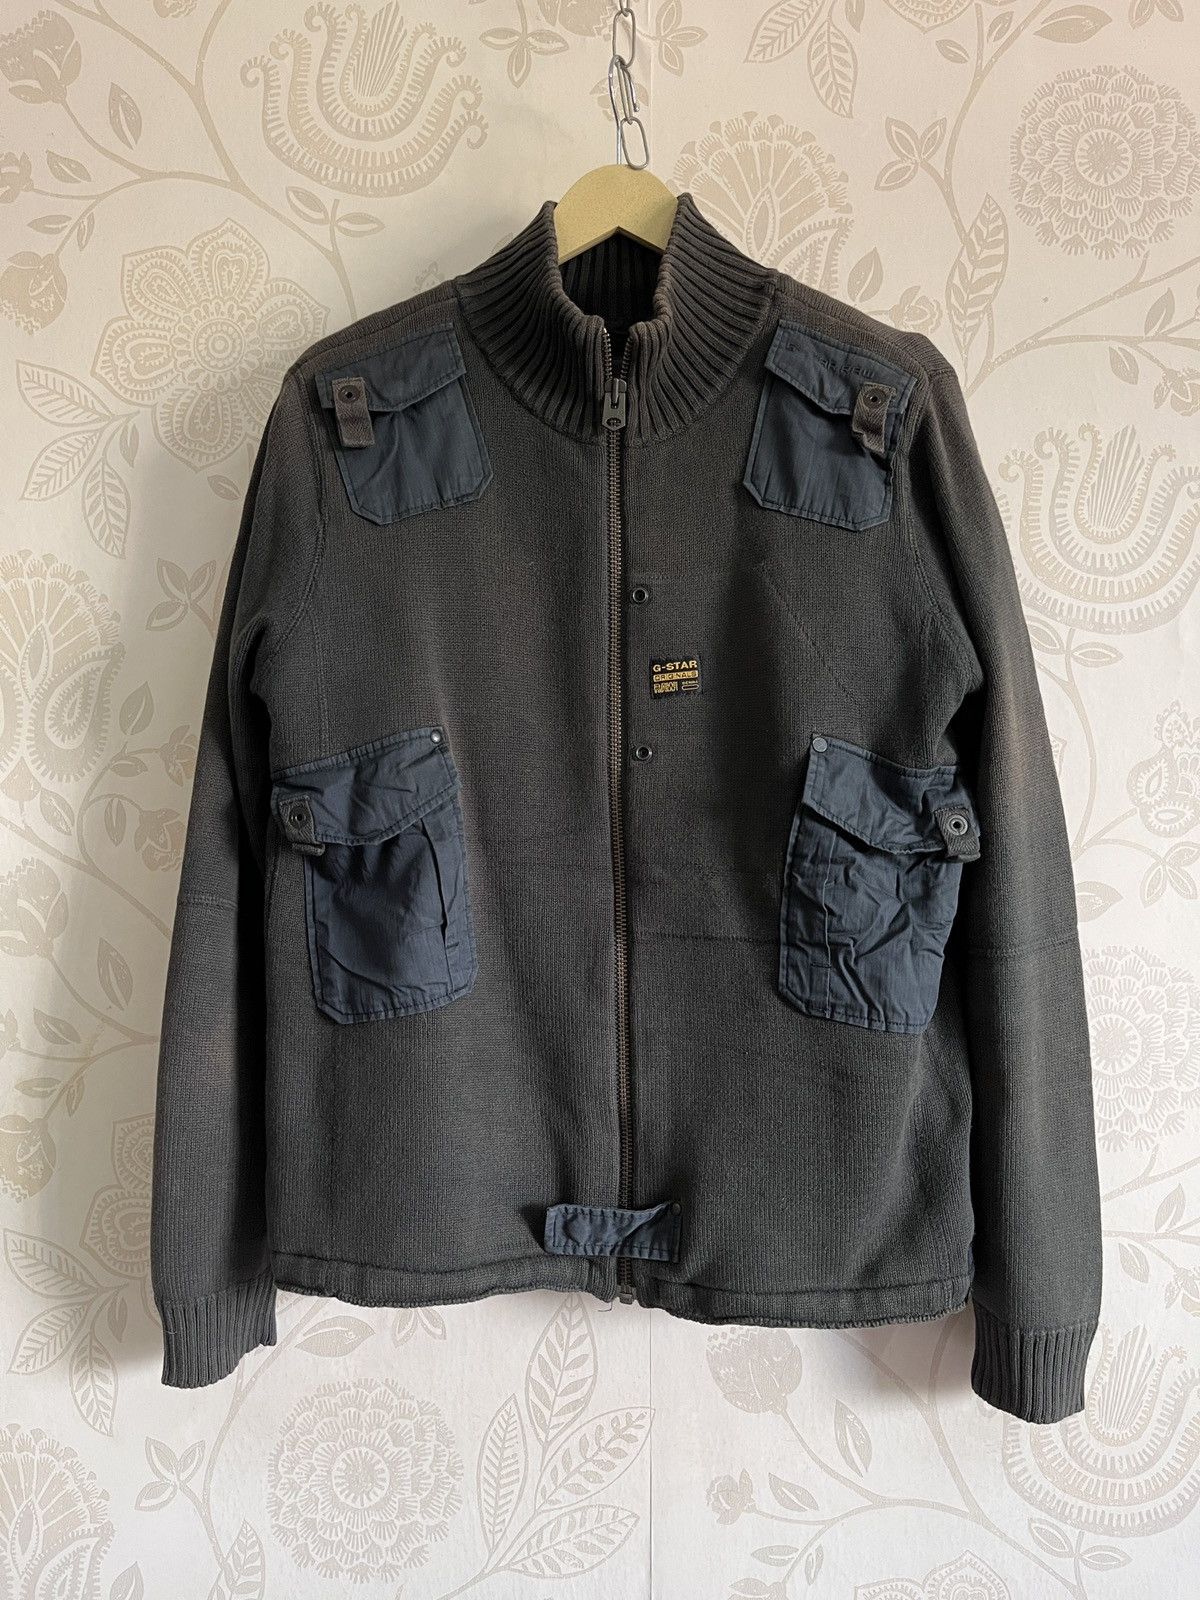 Vintage - G Star Raw Army Tactical Knitwear Wool Sweater Jacket - 1